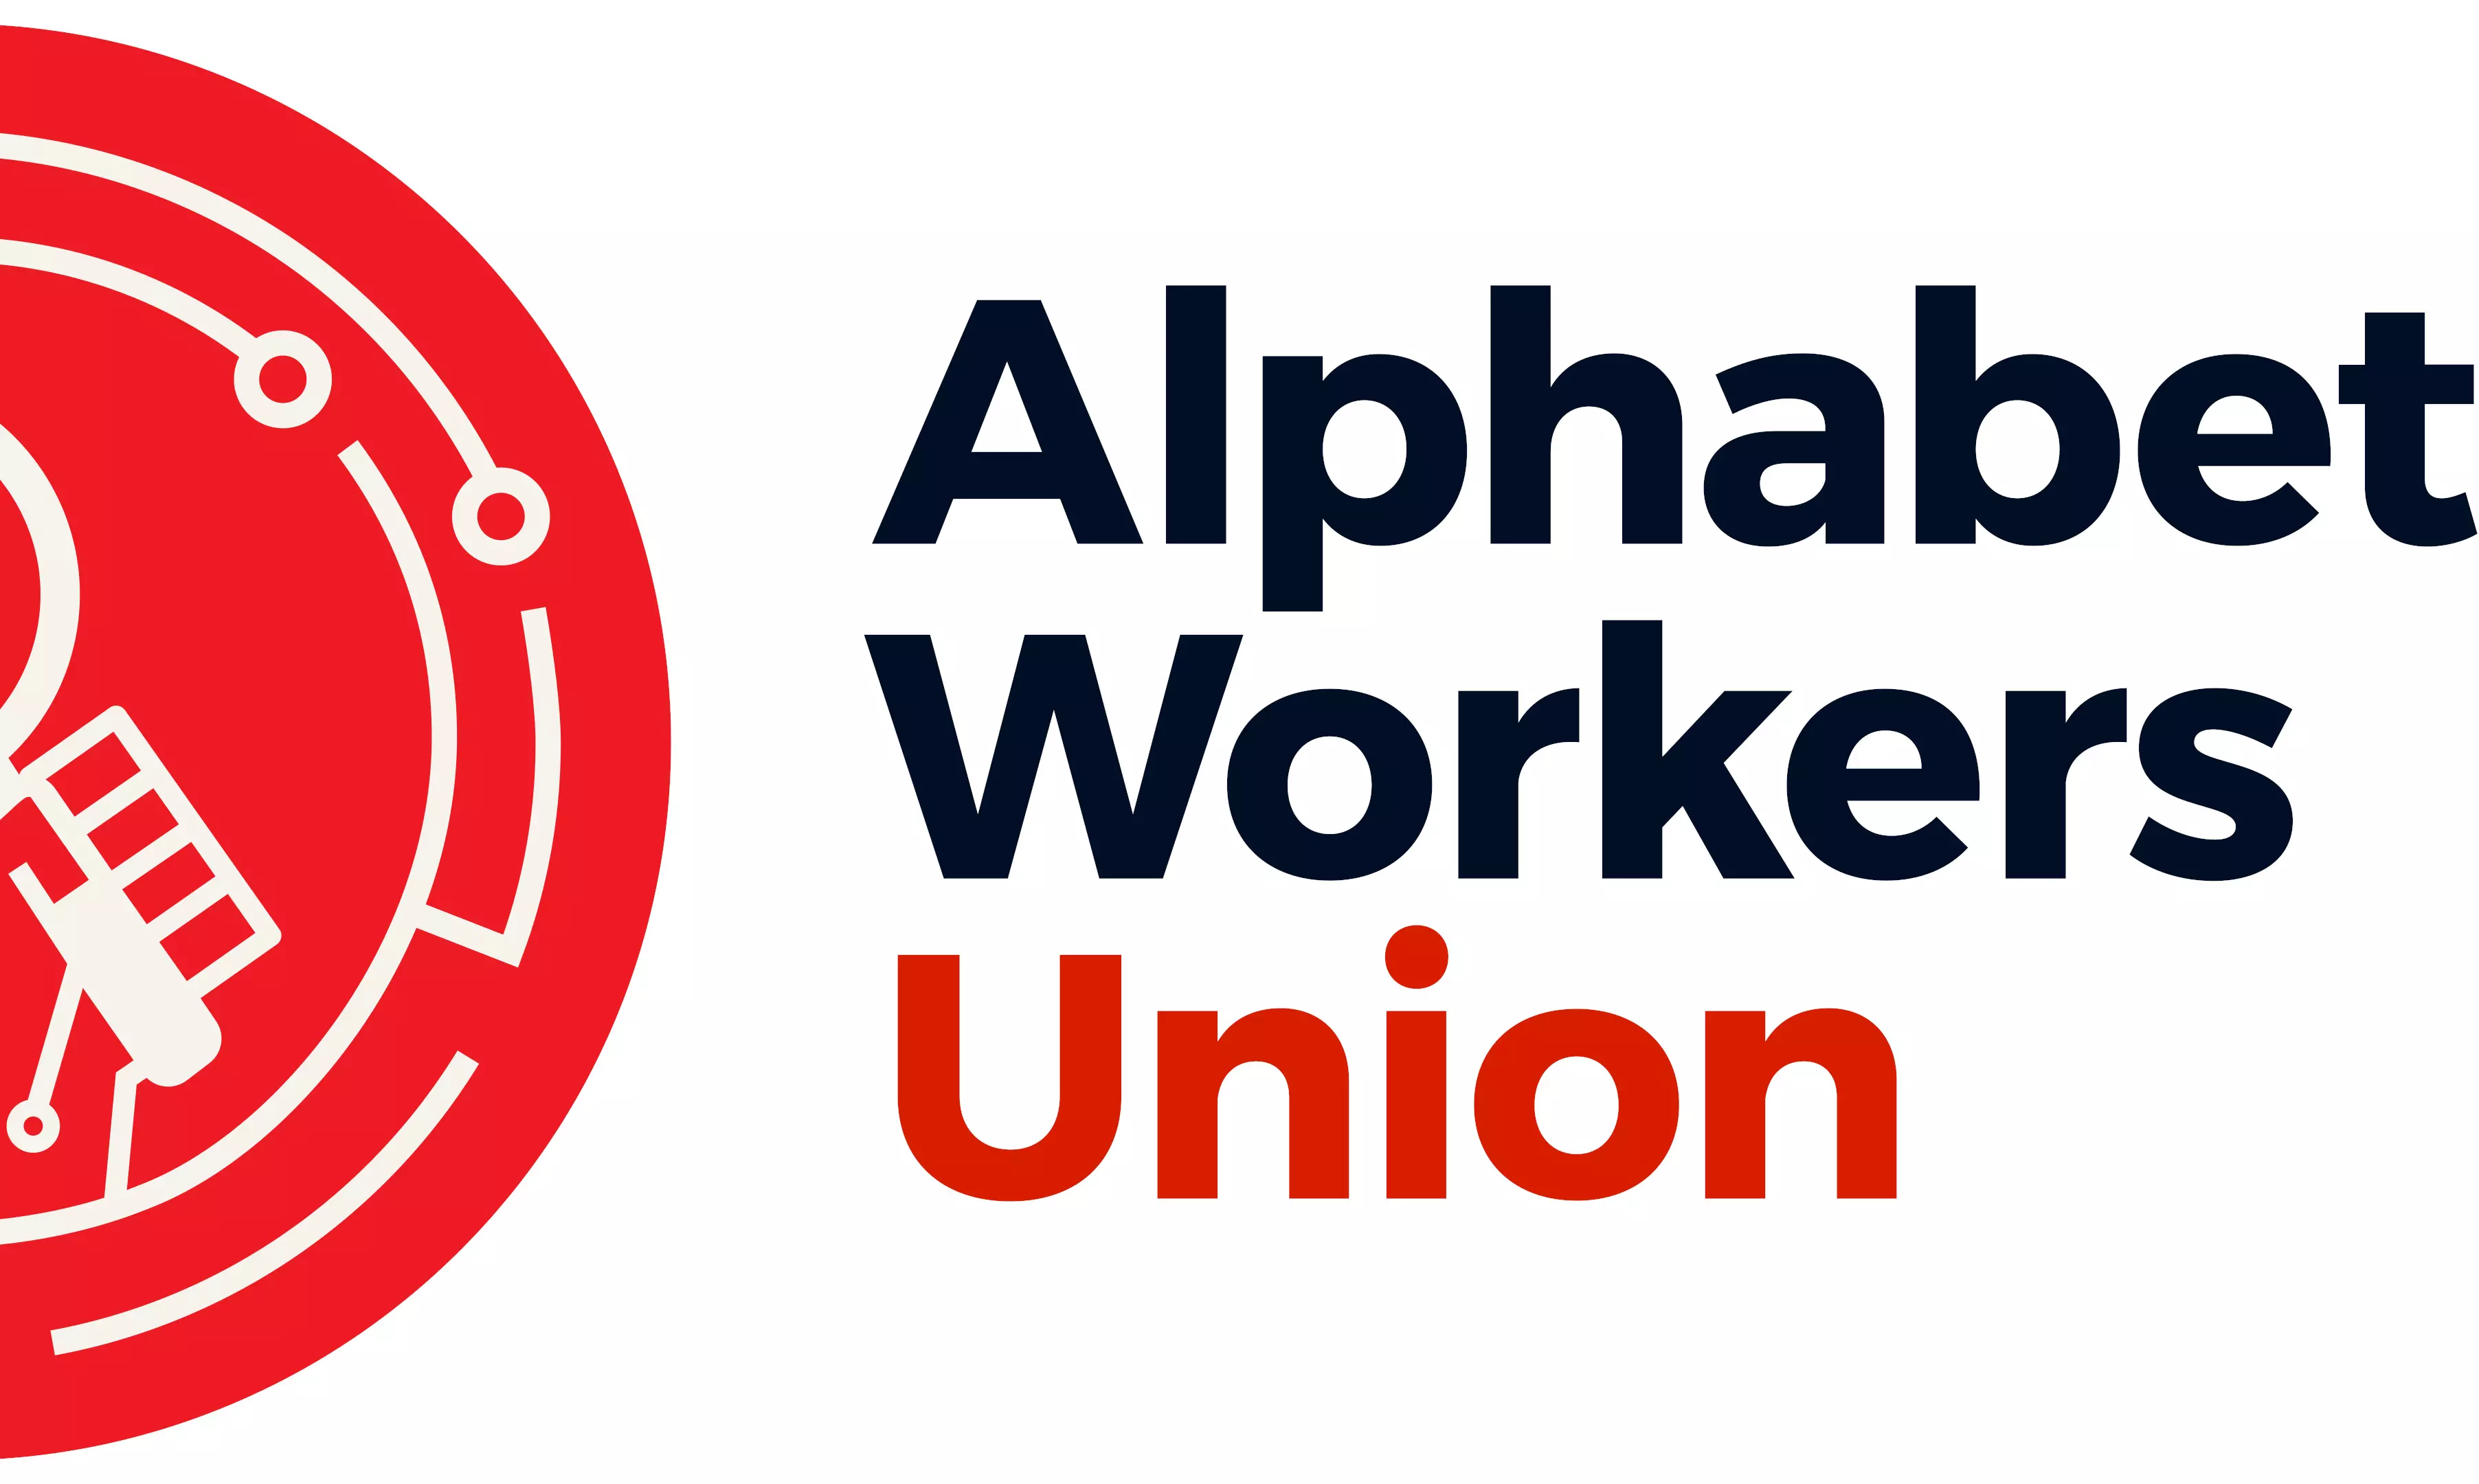 More than 200 Google and Alphabet employees form a labour union